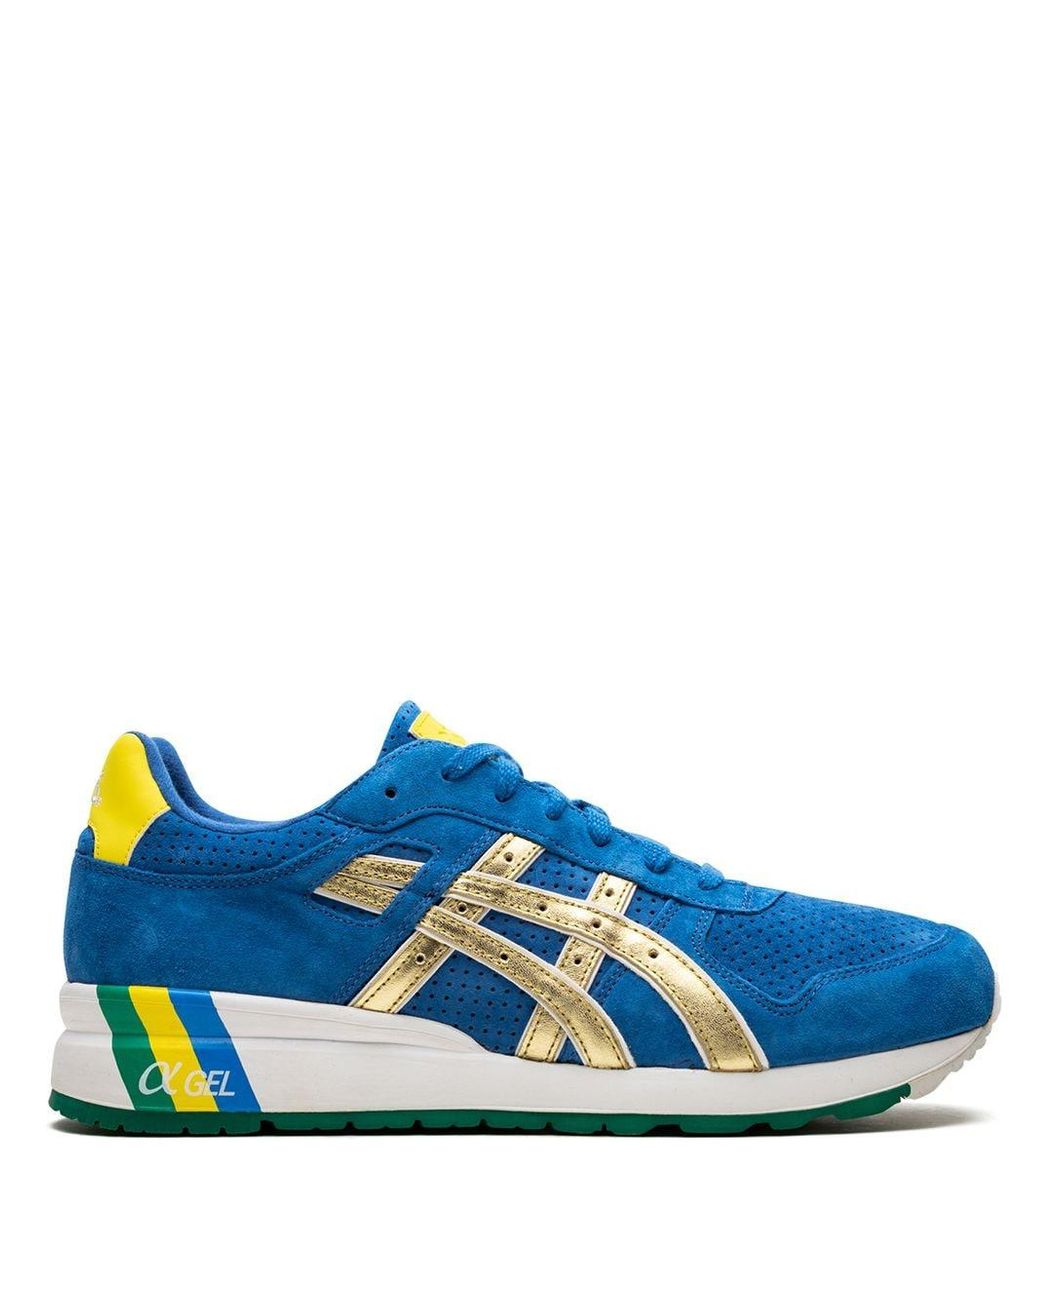 Asics Suede Gt2 Low-top Sneakers in Blue for Men - Lyst